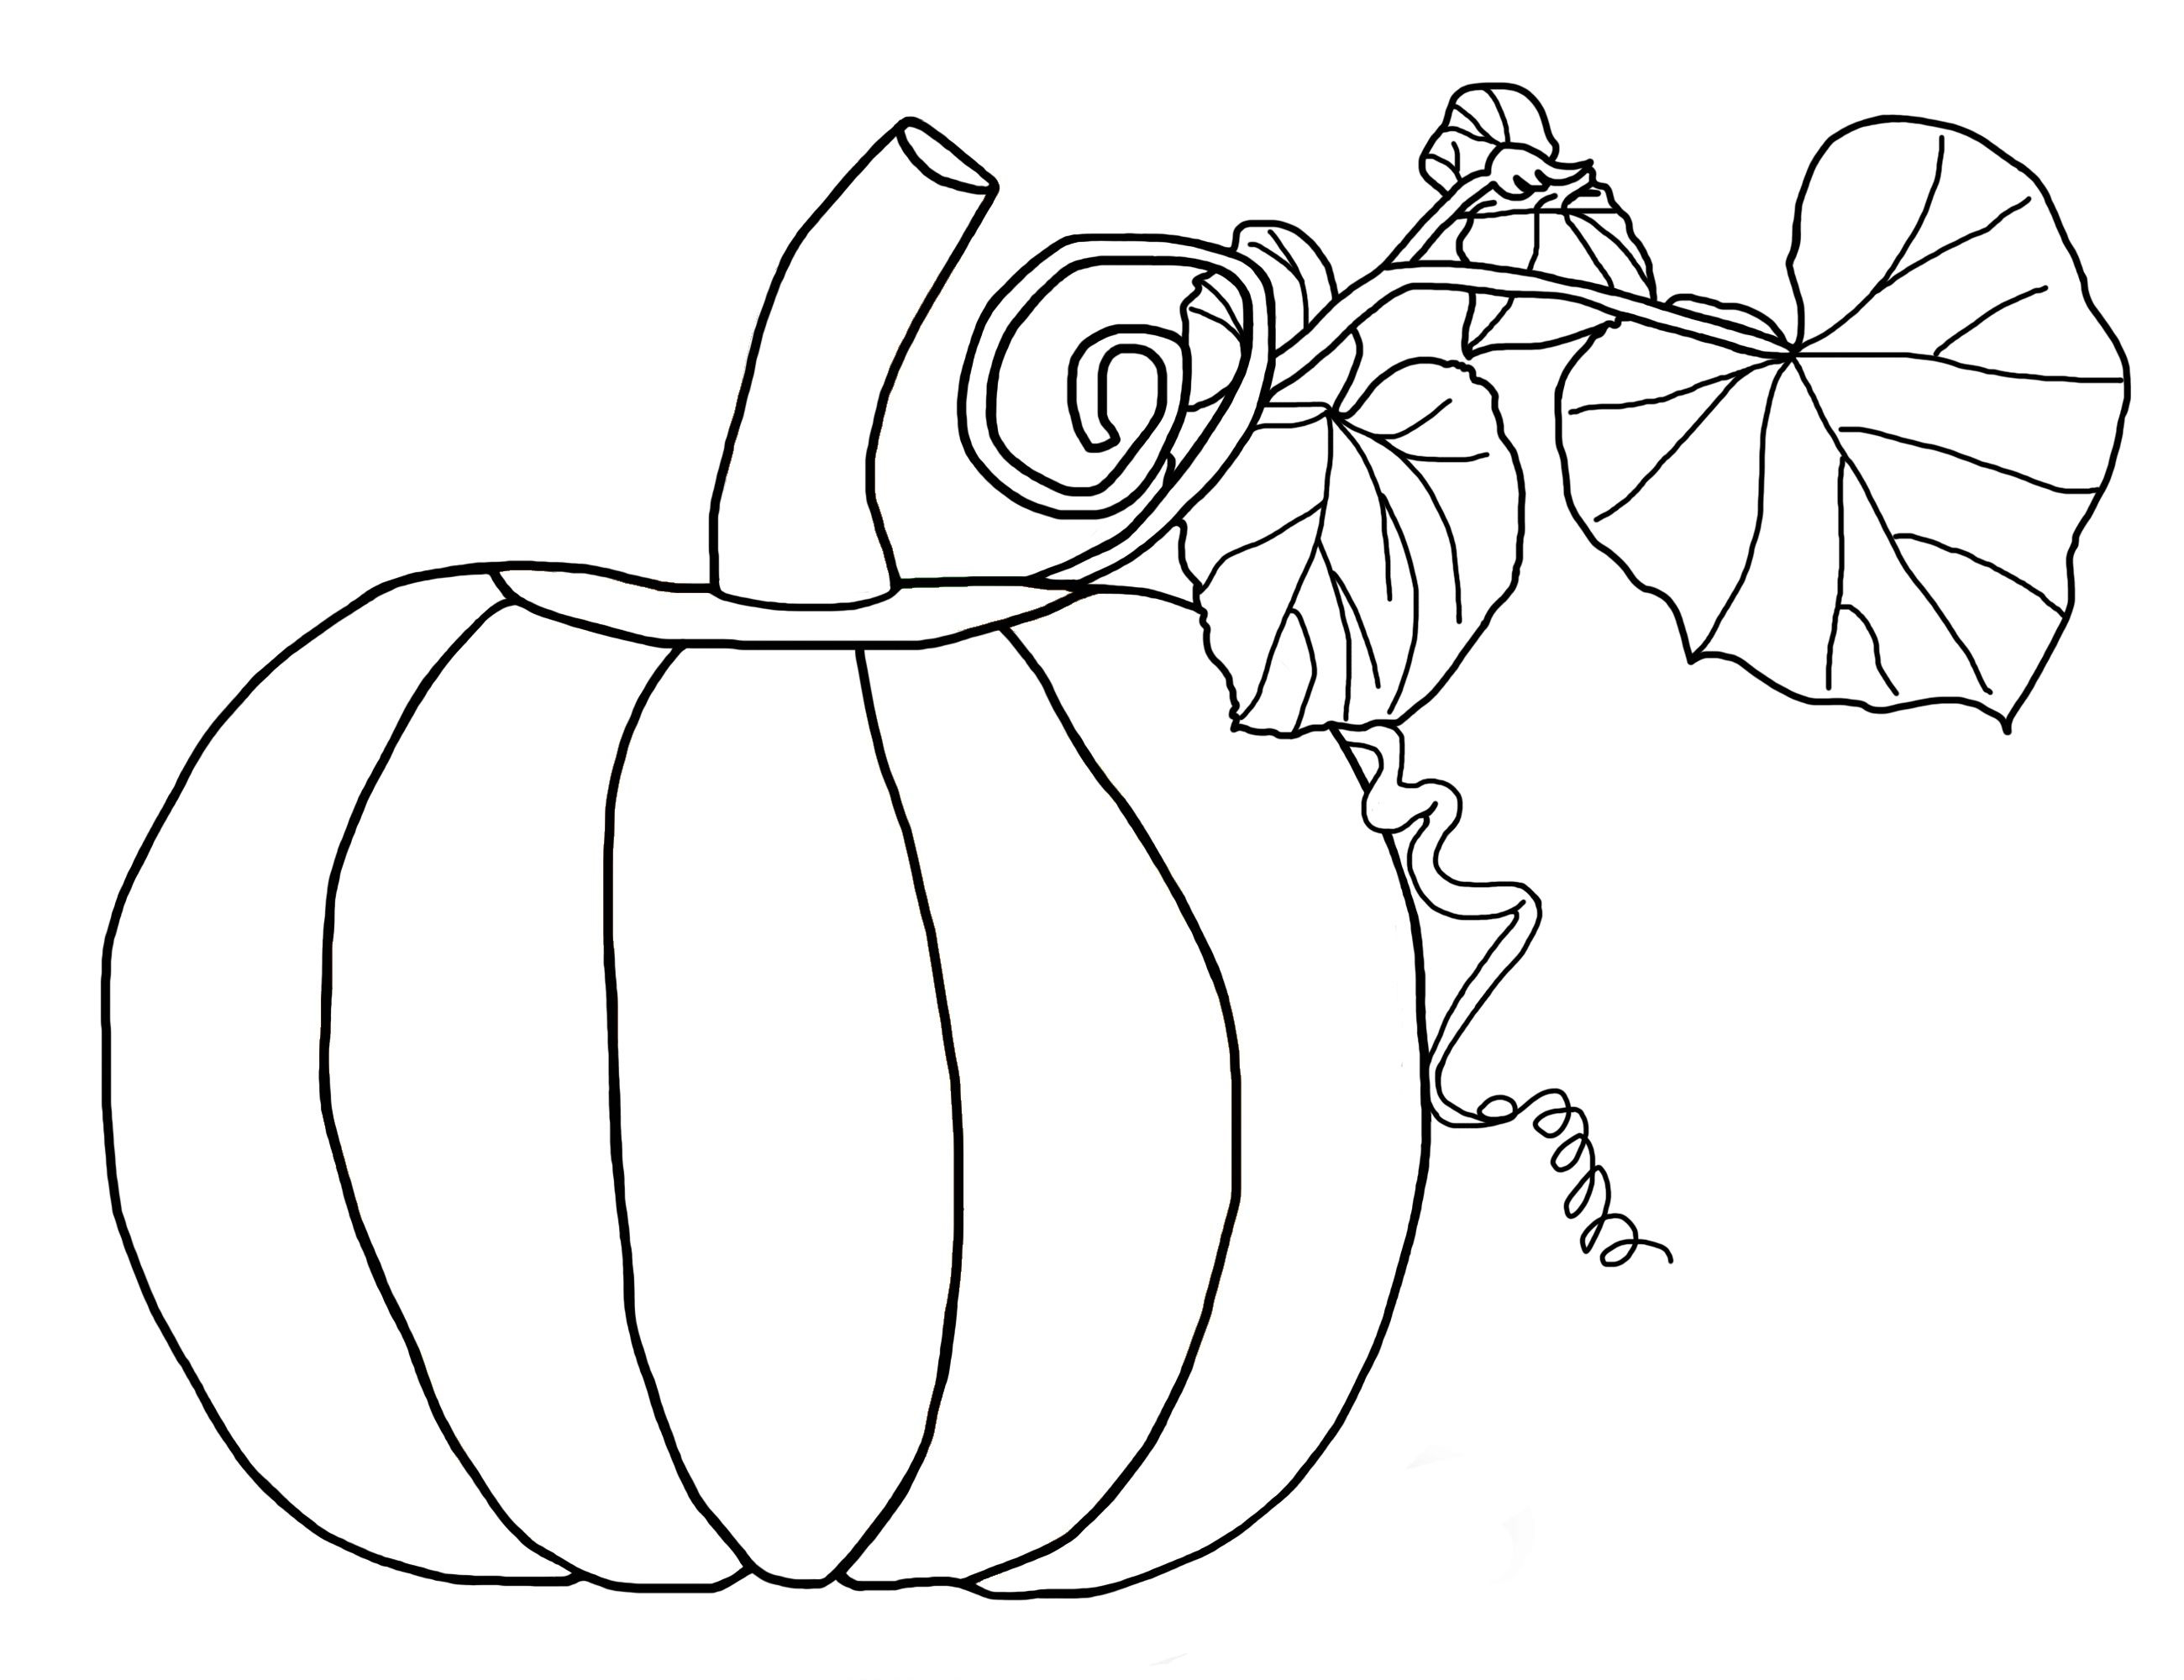 Halloween pumpkin coloring pages